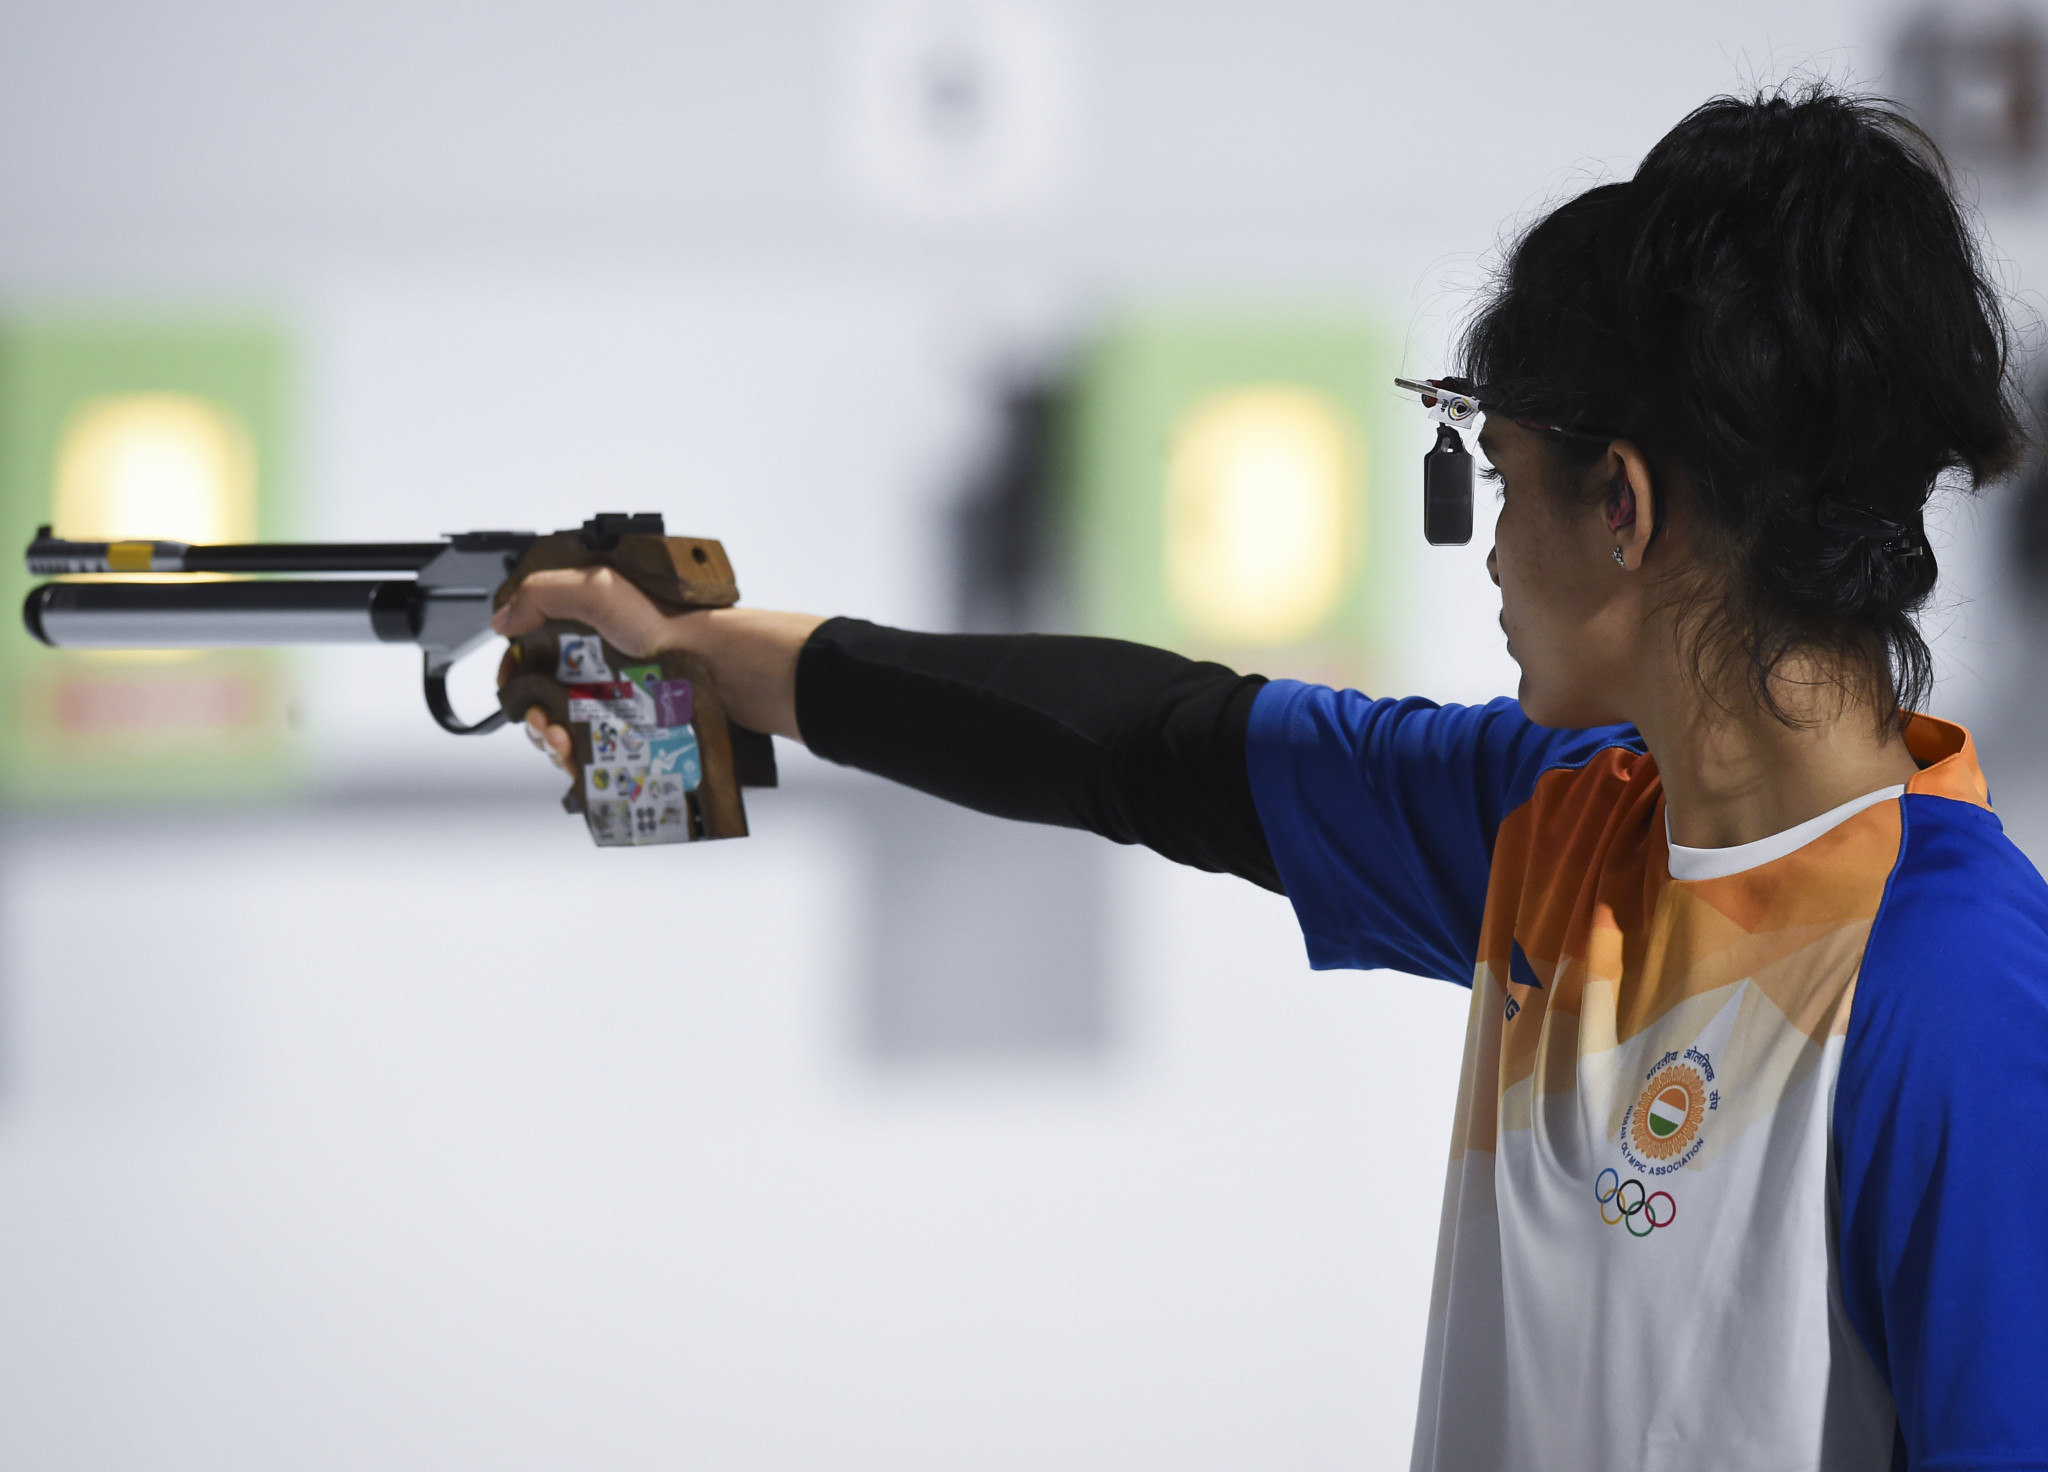 Manu Bhaker paired with Javad Foroughi to take a 16-8 final victory in the mixed 10m air pistol tournament ©Getty Images